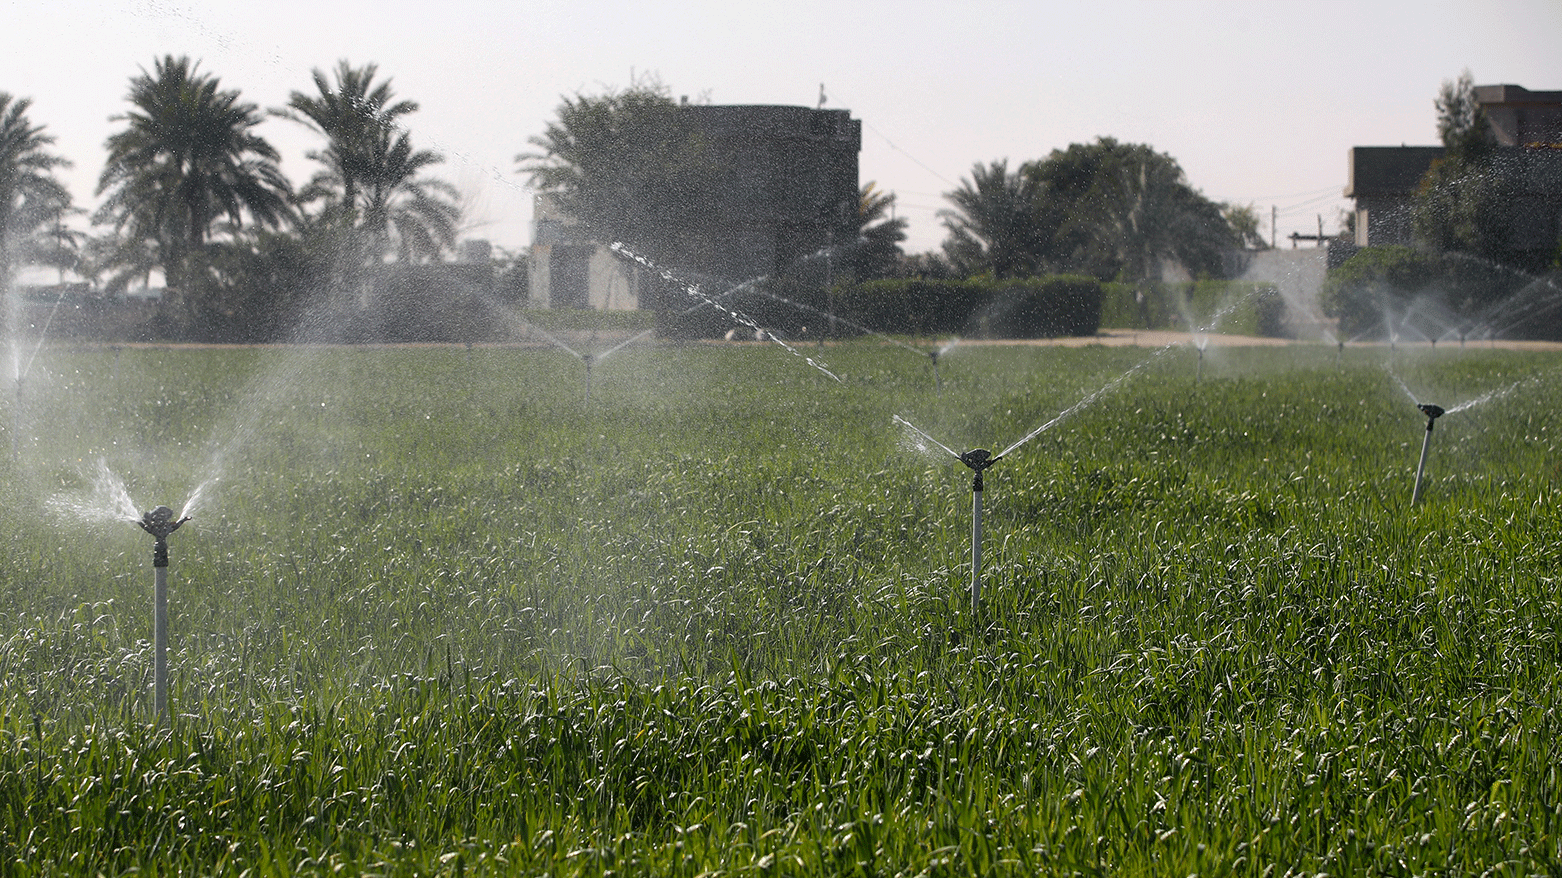 Sprinklers and drip irrigation help Iraqis beat drought